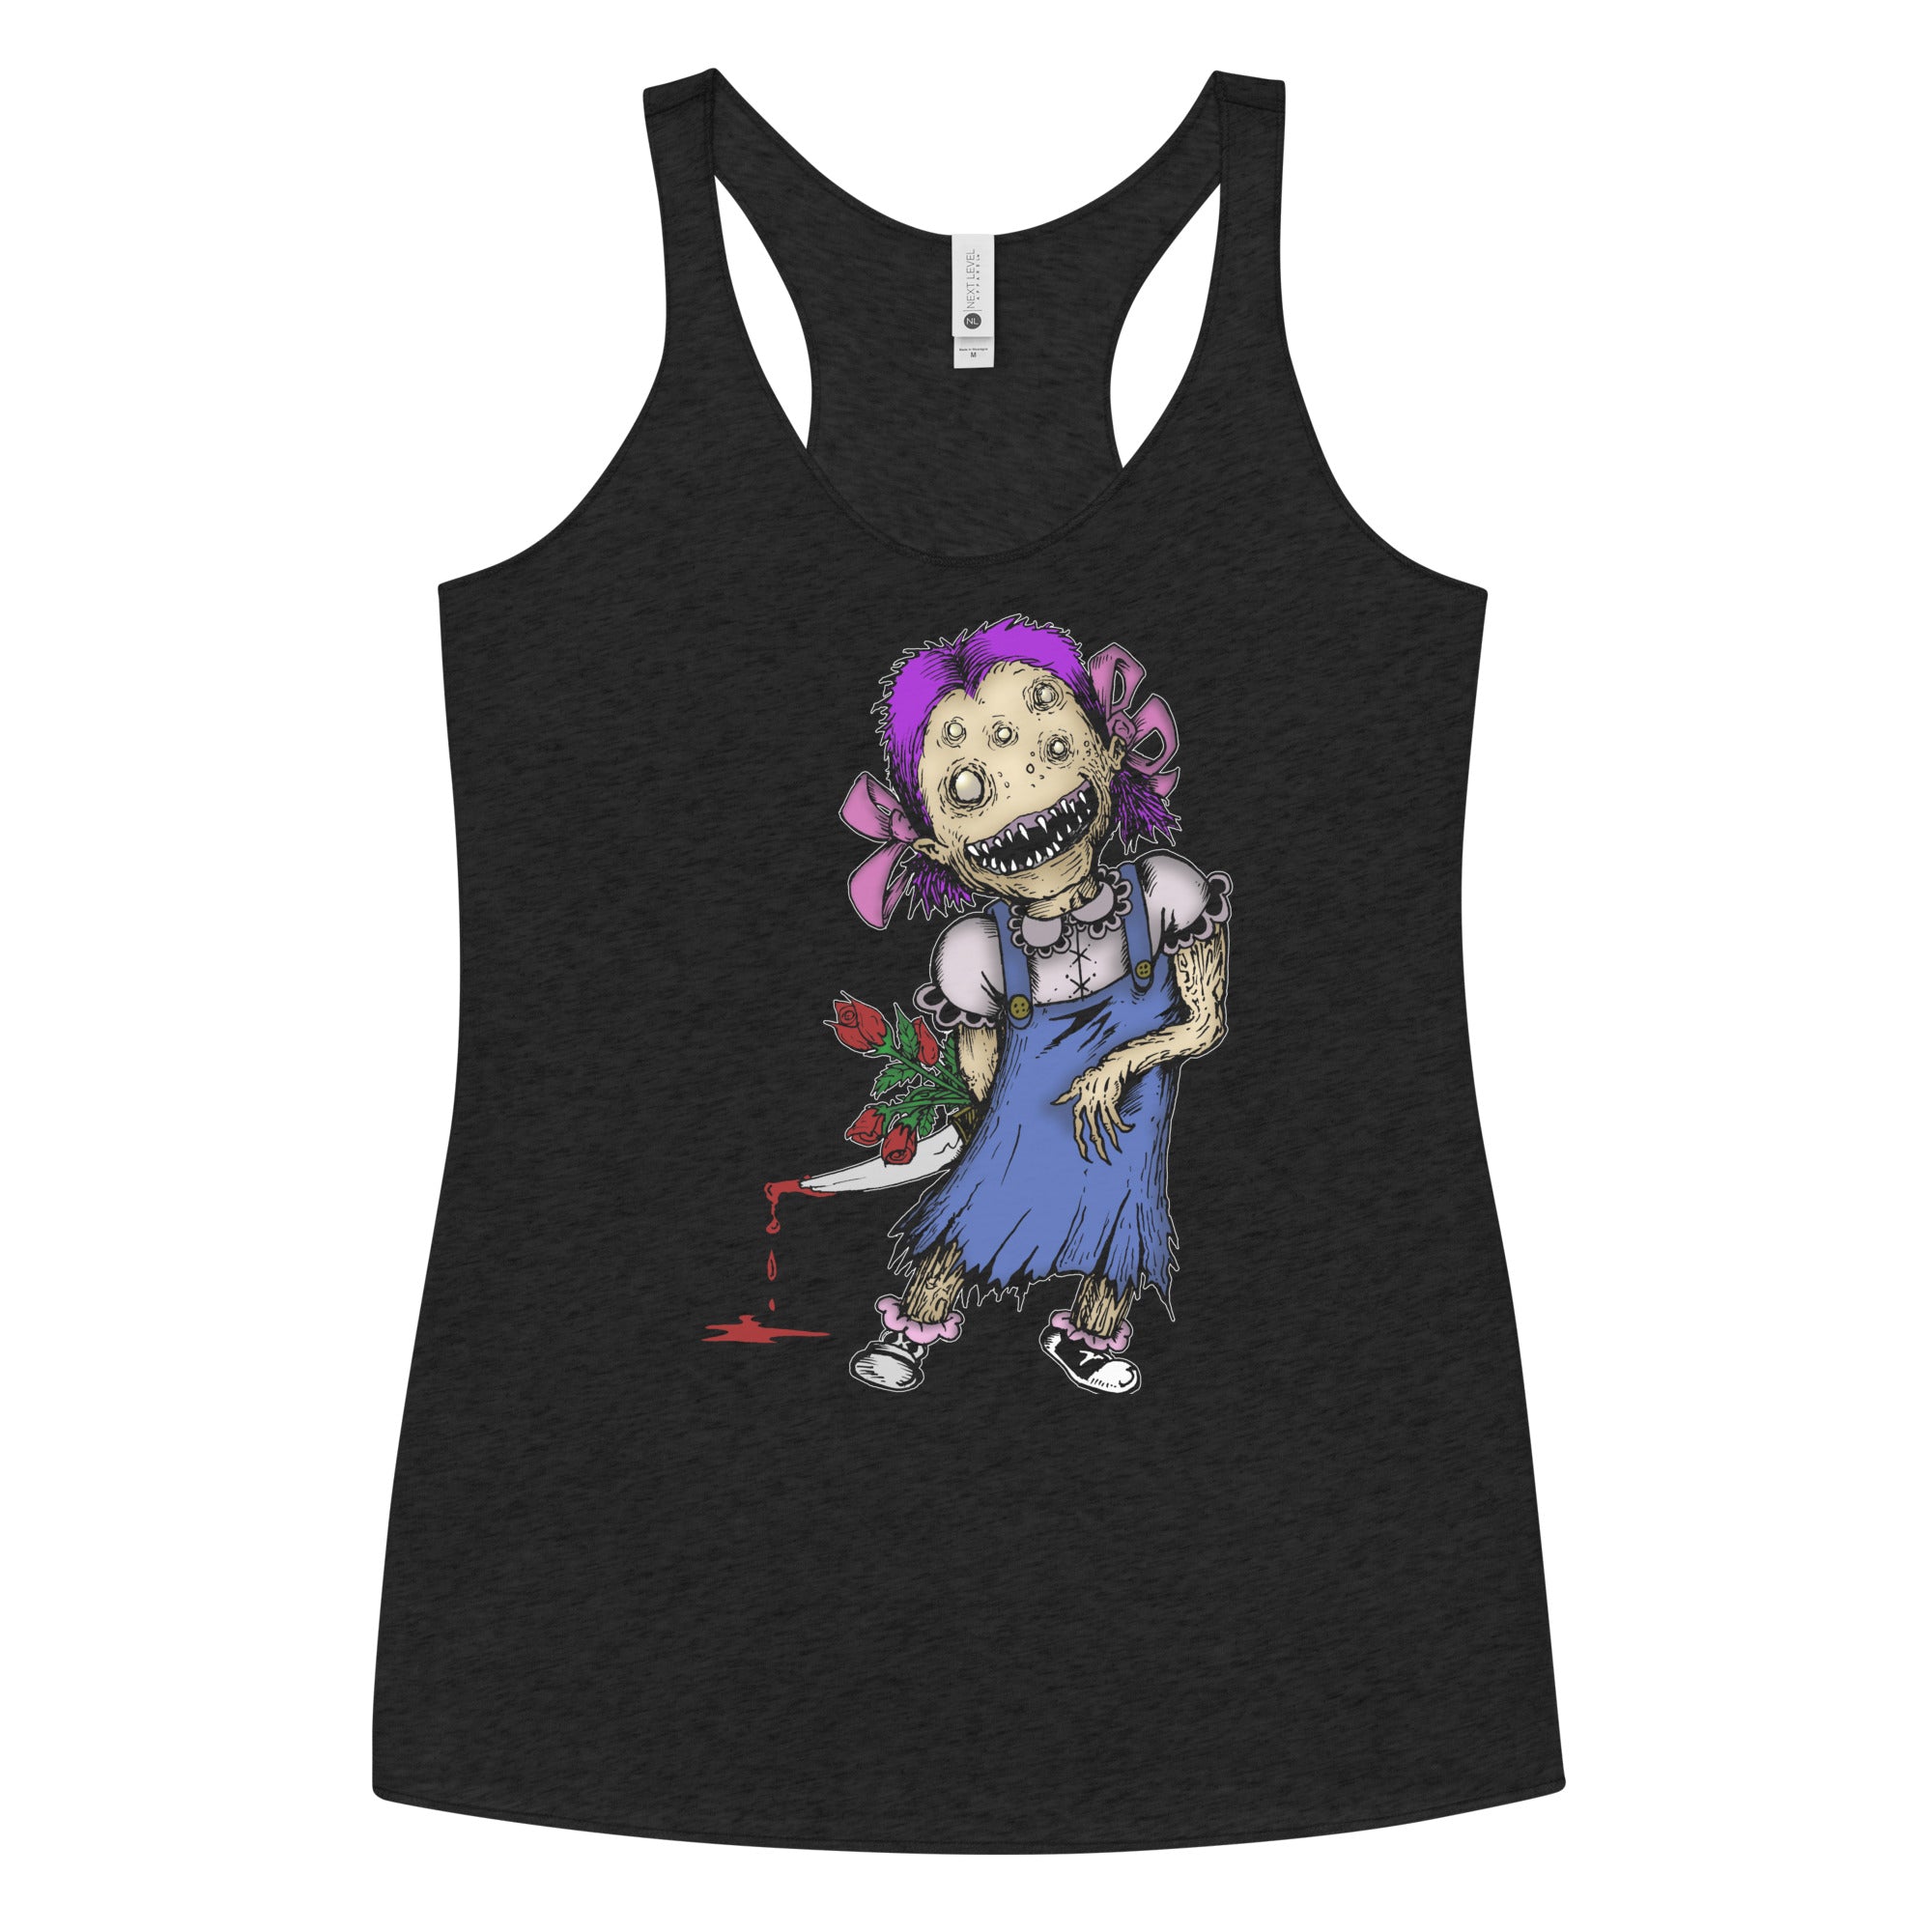 Wicked Little Girl with Bloody Knife Horror Style Women's Racerback Tank Top Shirt - Edge of Life Designs